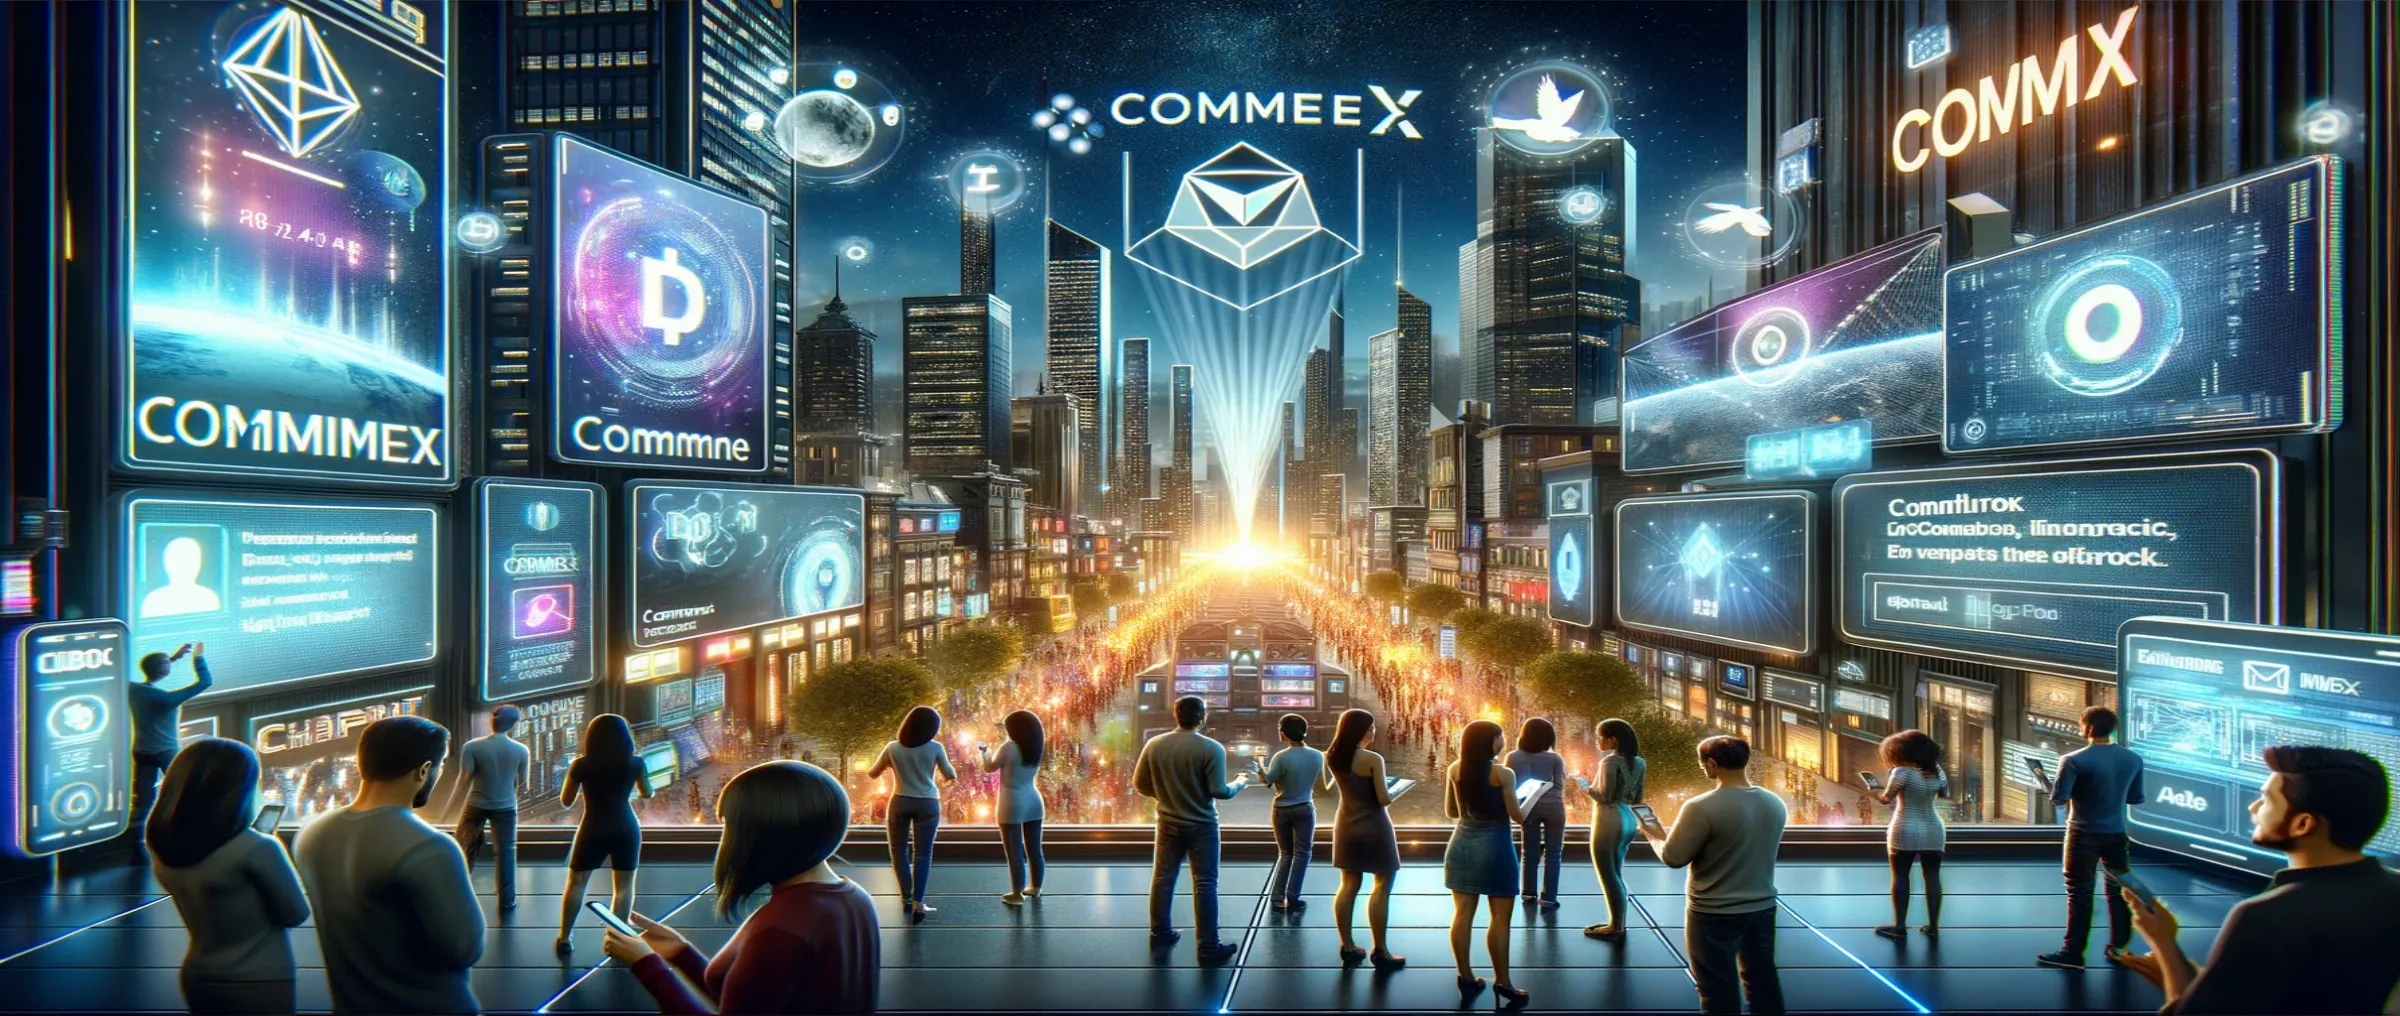 CommEX has announced the launch of its first airdrop